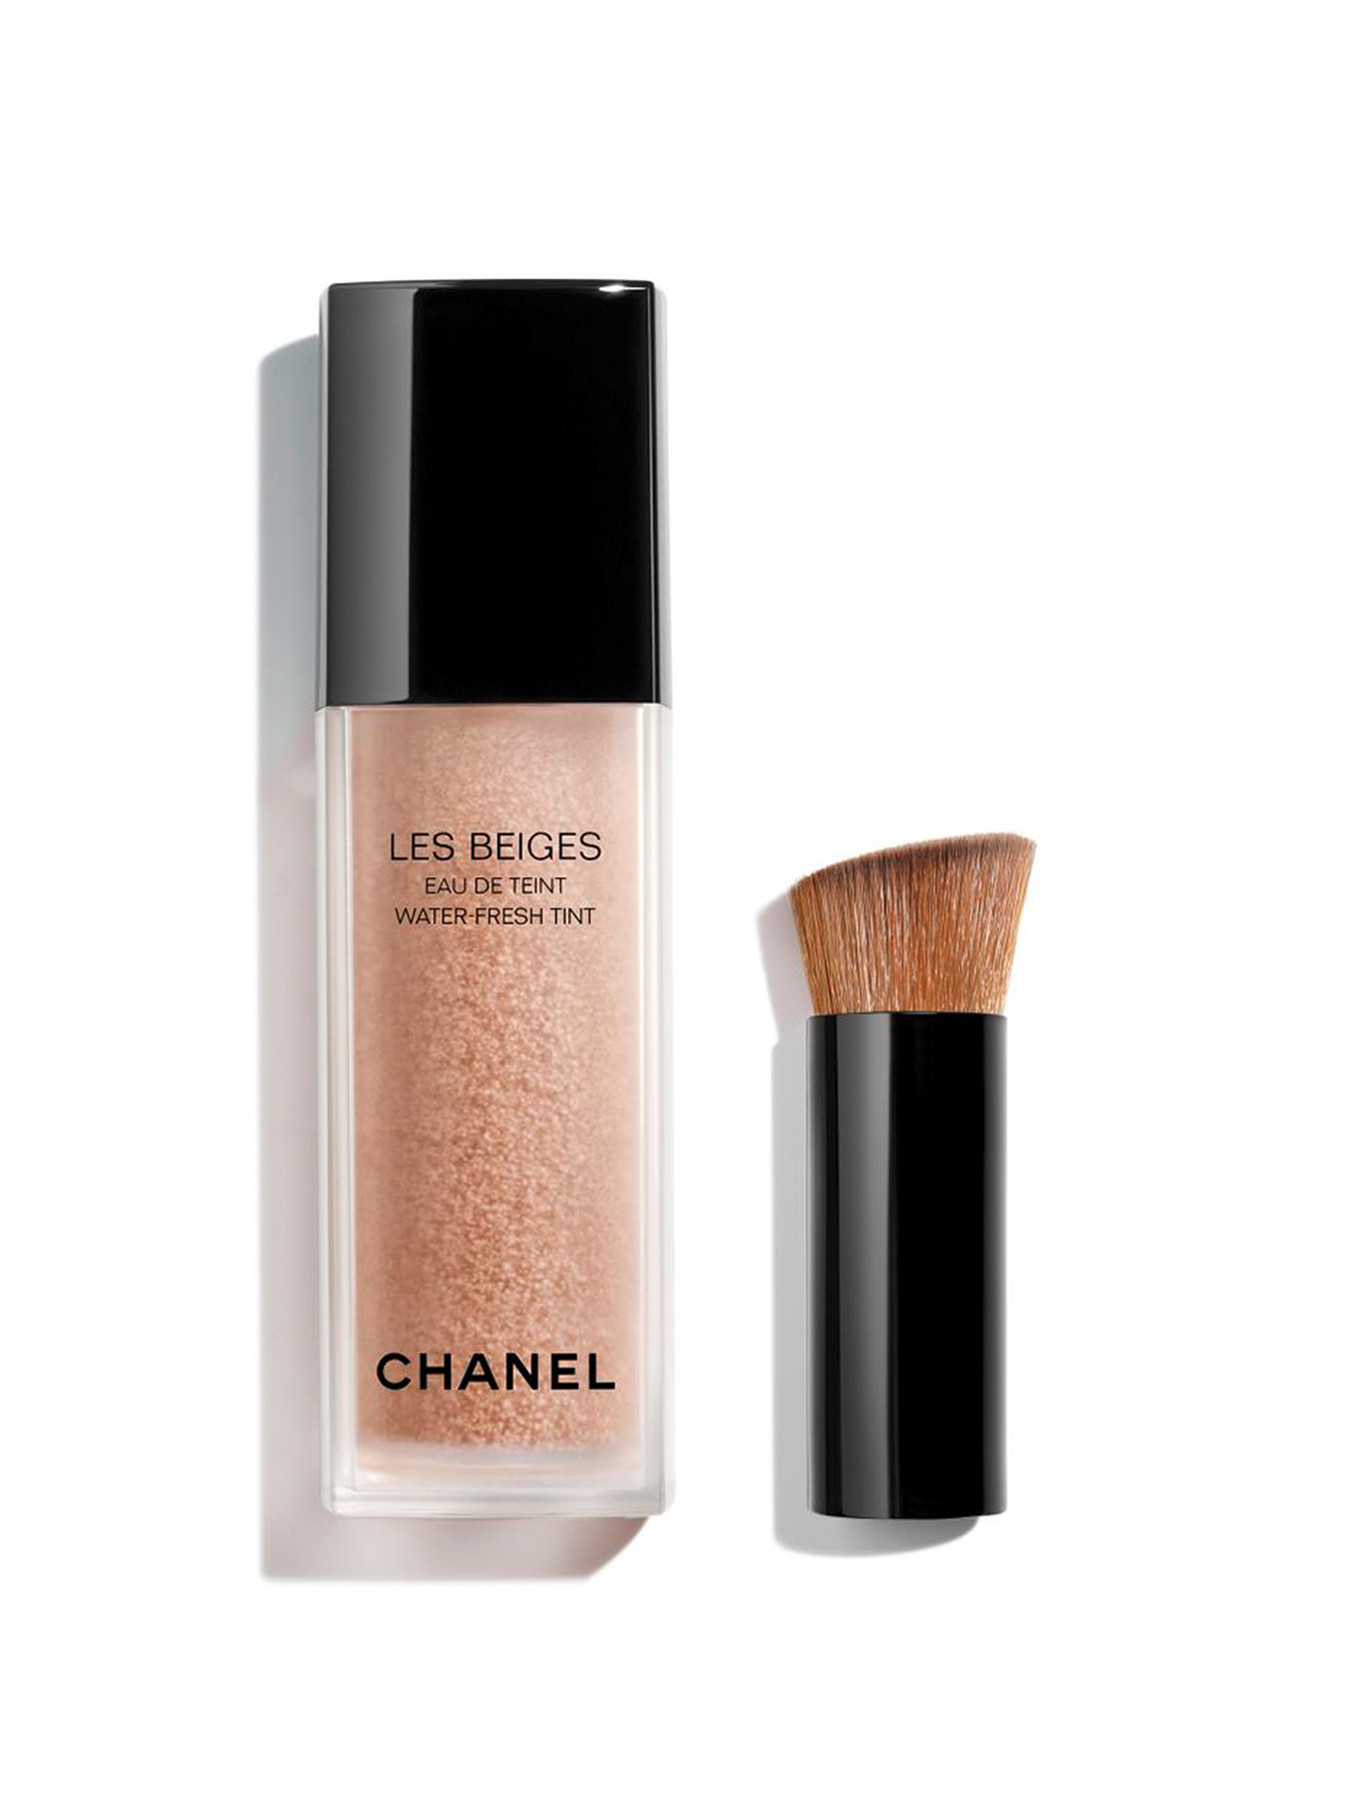 CHANEL LES BEIGES Water-Fresh Tint Travel Size